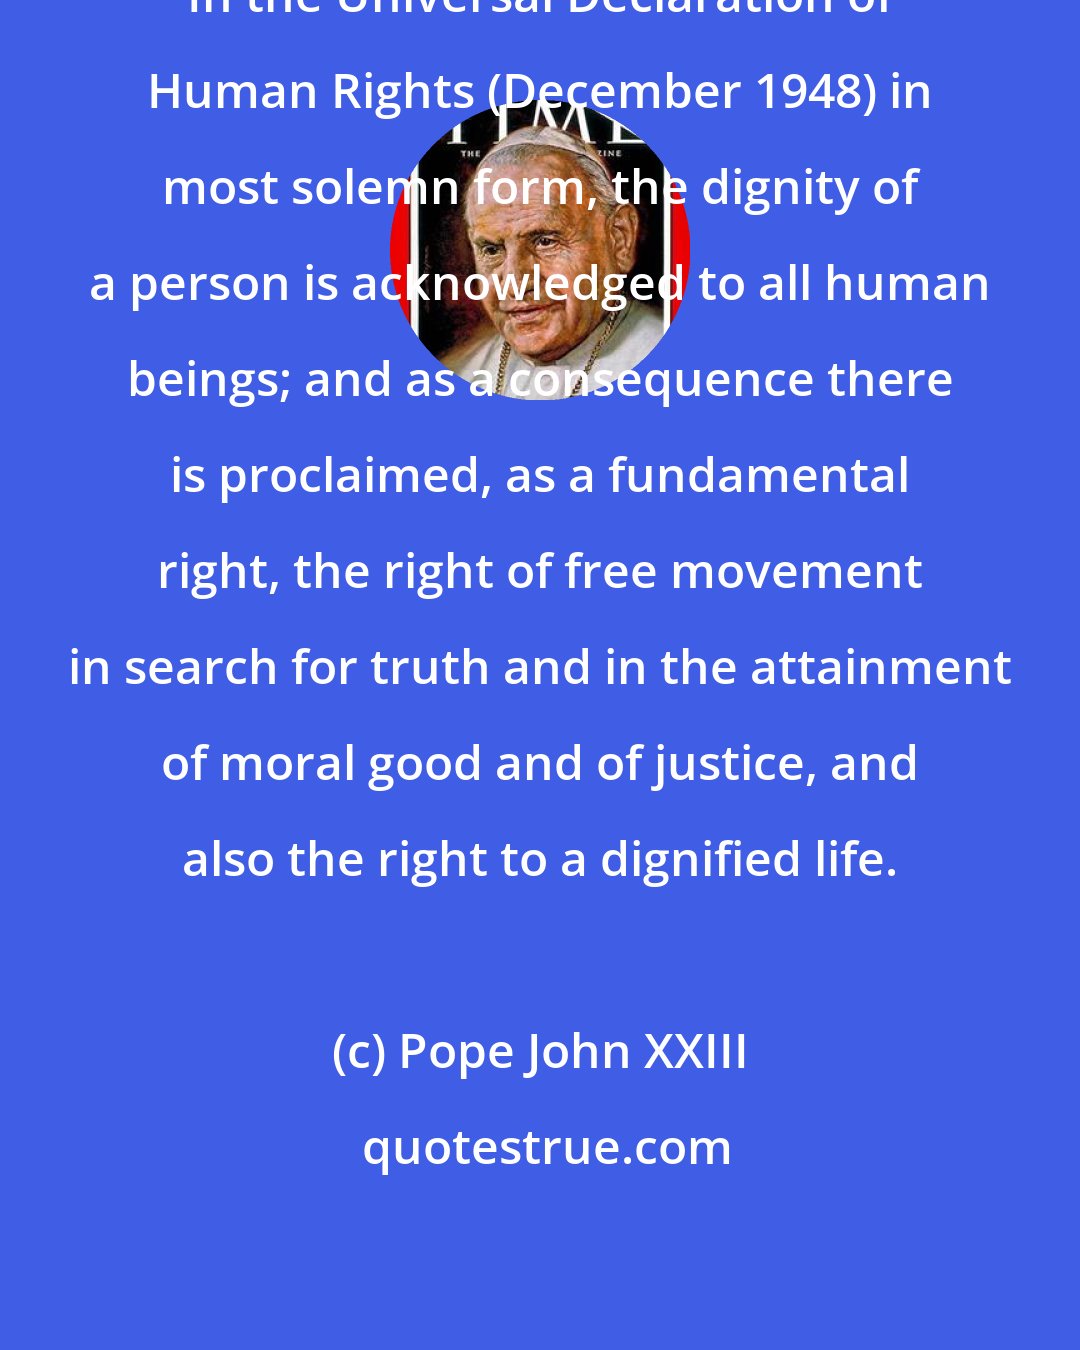 Pope John XXIII: In the Universal Declaration of Human Rights (December 1948) in most solemn form, the dignity of a person is acknowledged to all human beings; and as a consequence there is proclaimed, as a fundamental right, the right of free movement in search for truth and in the attainment of moral good and of justice, and also the right to a dignified life.